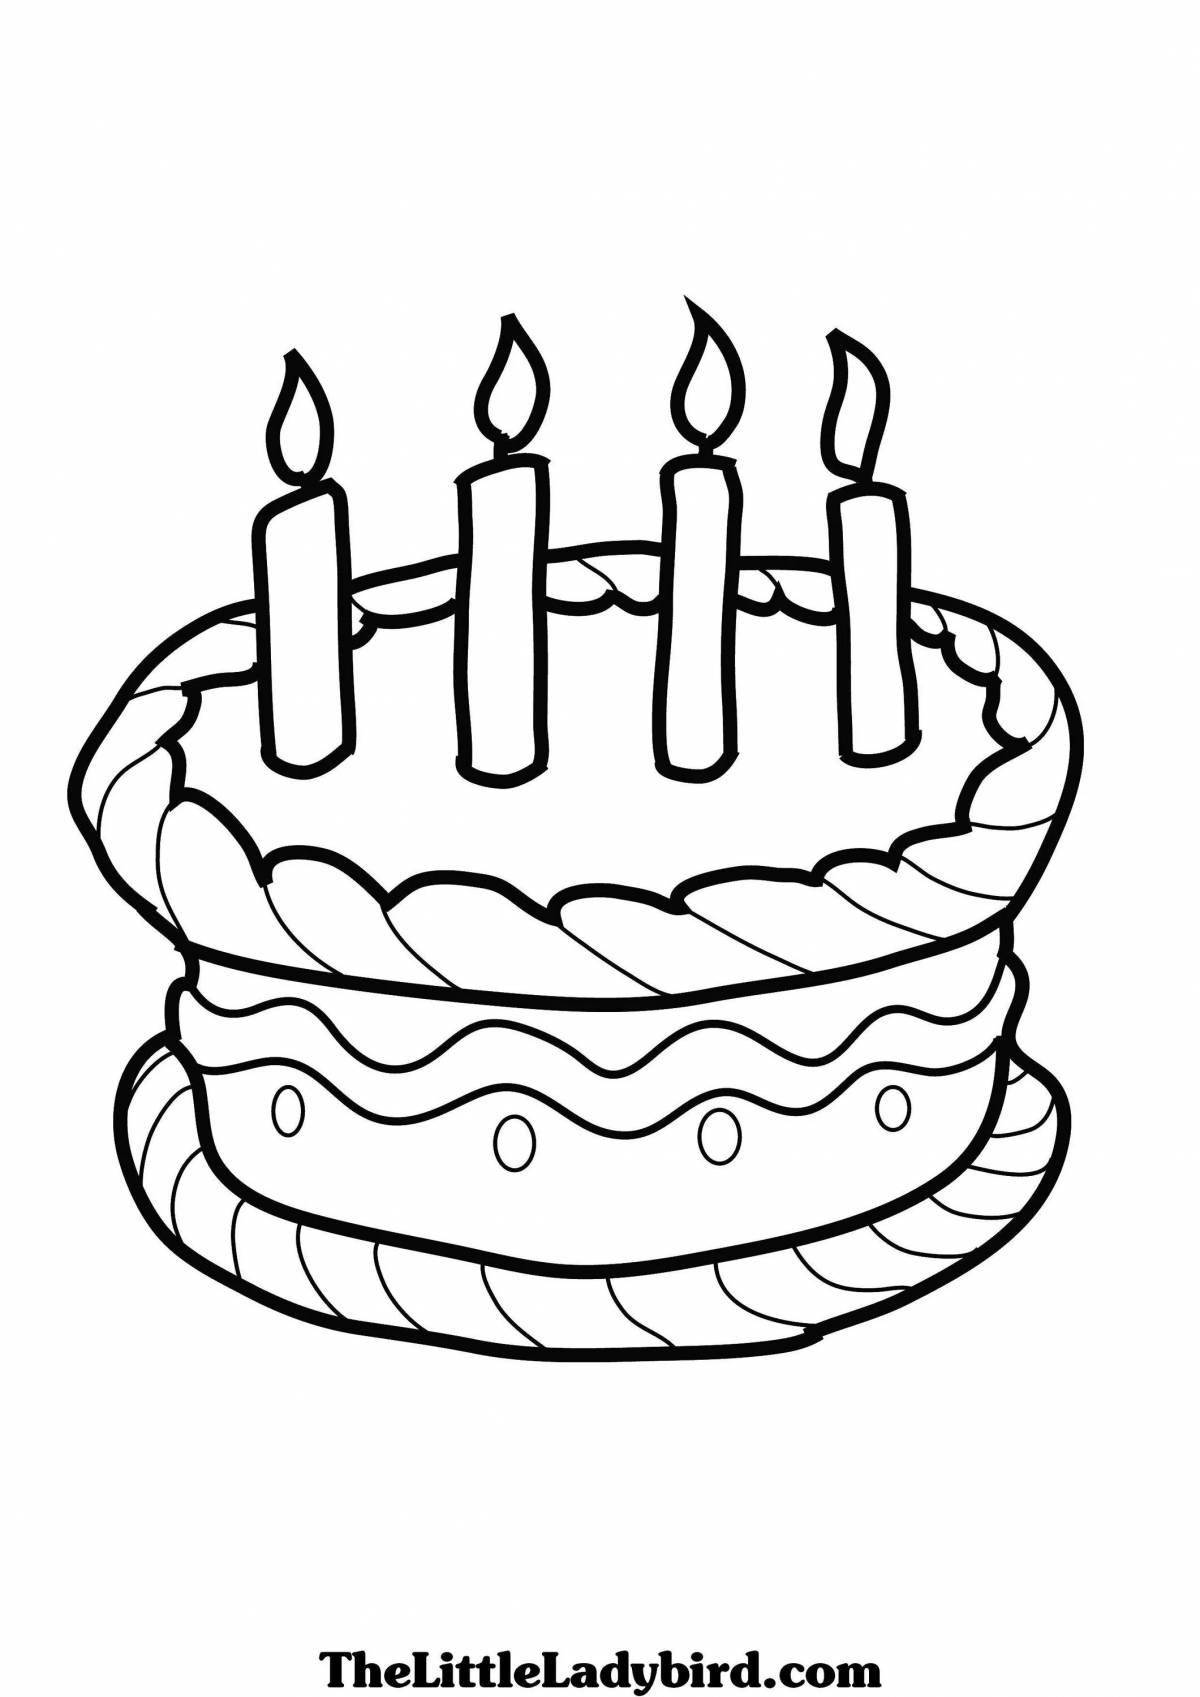 Crazy Cake Coloring Page for 3-4 year olds